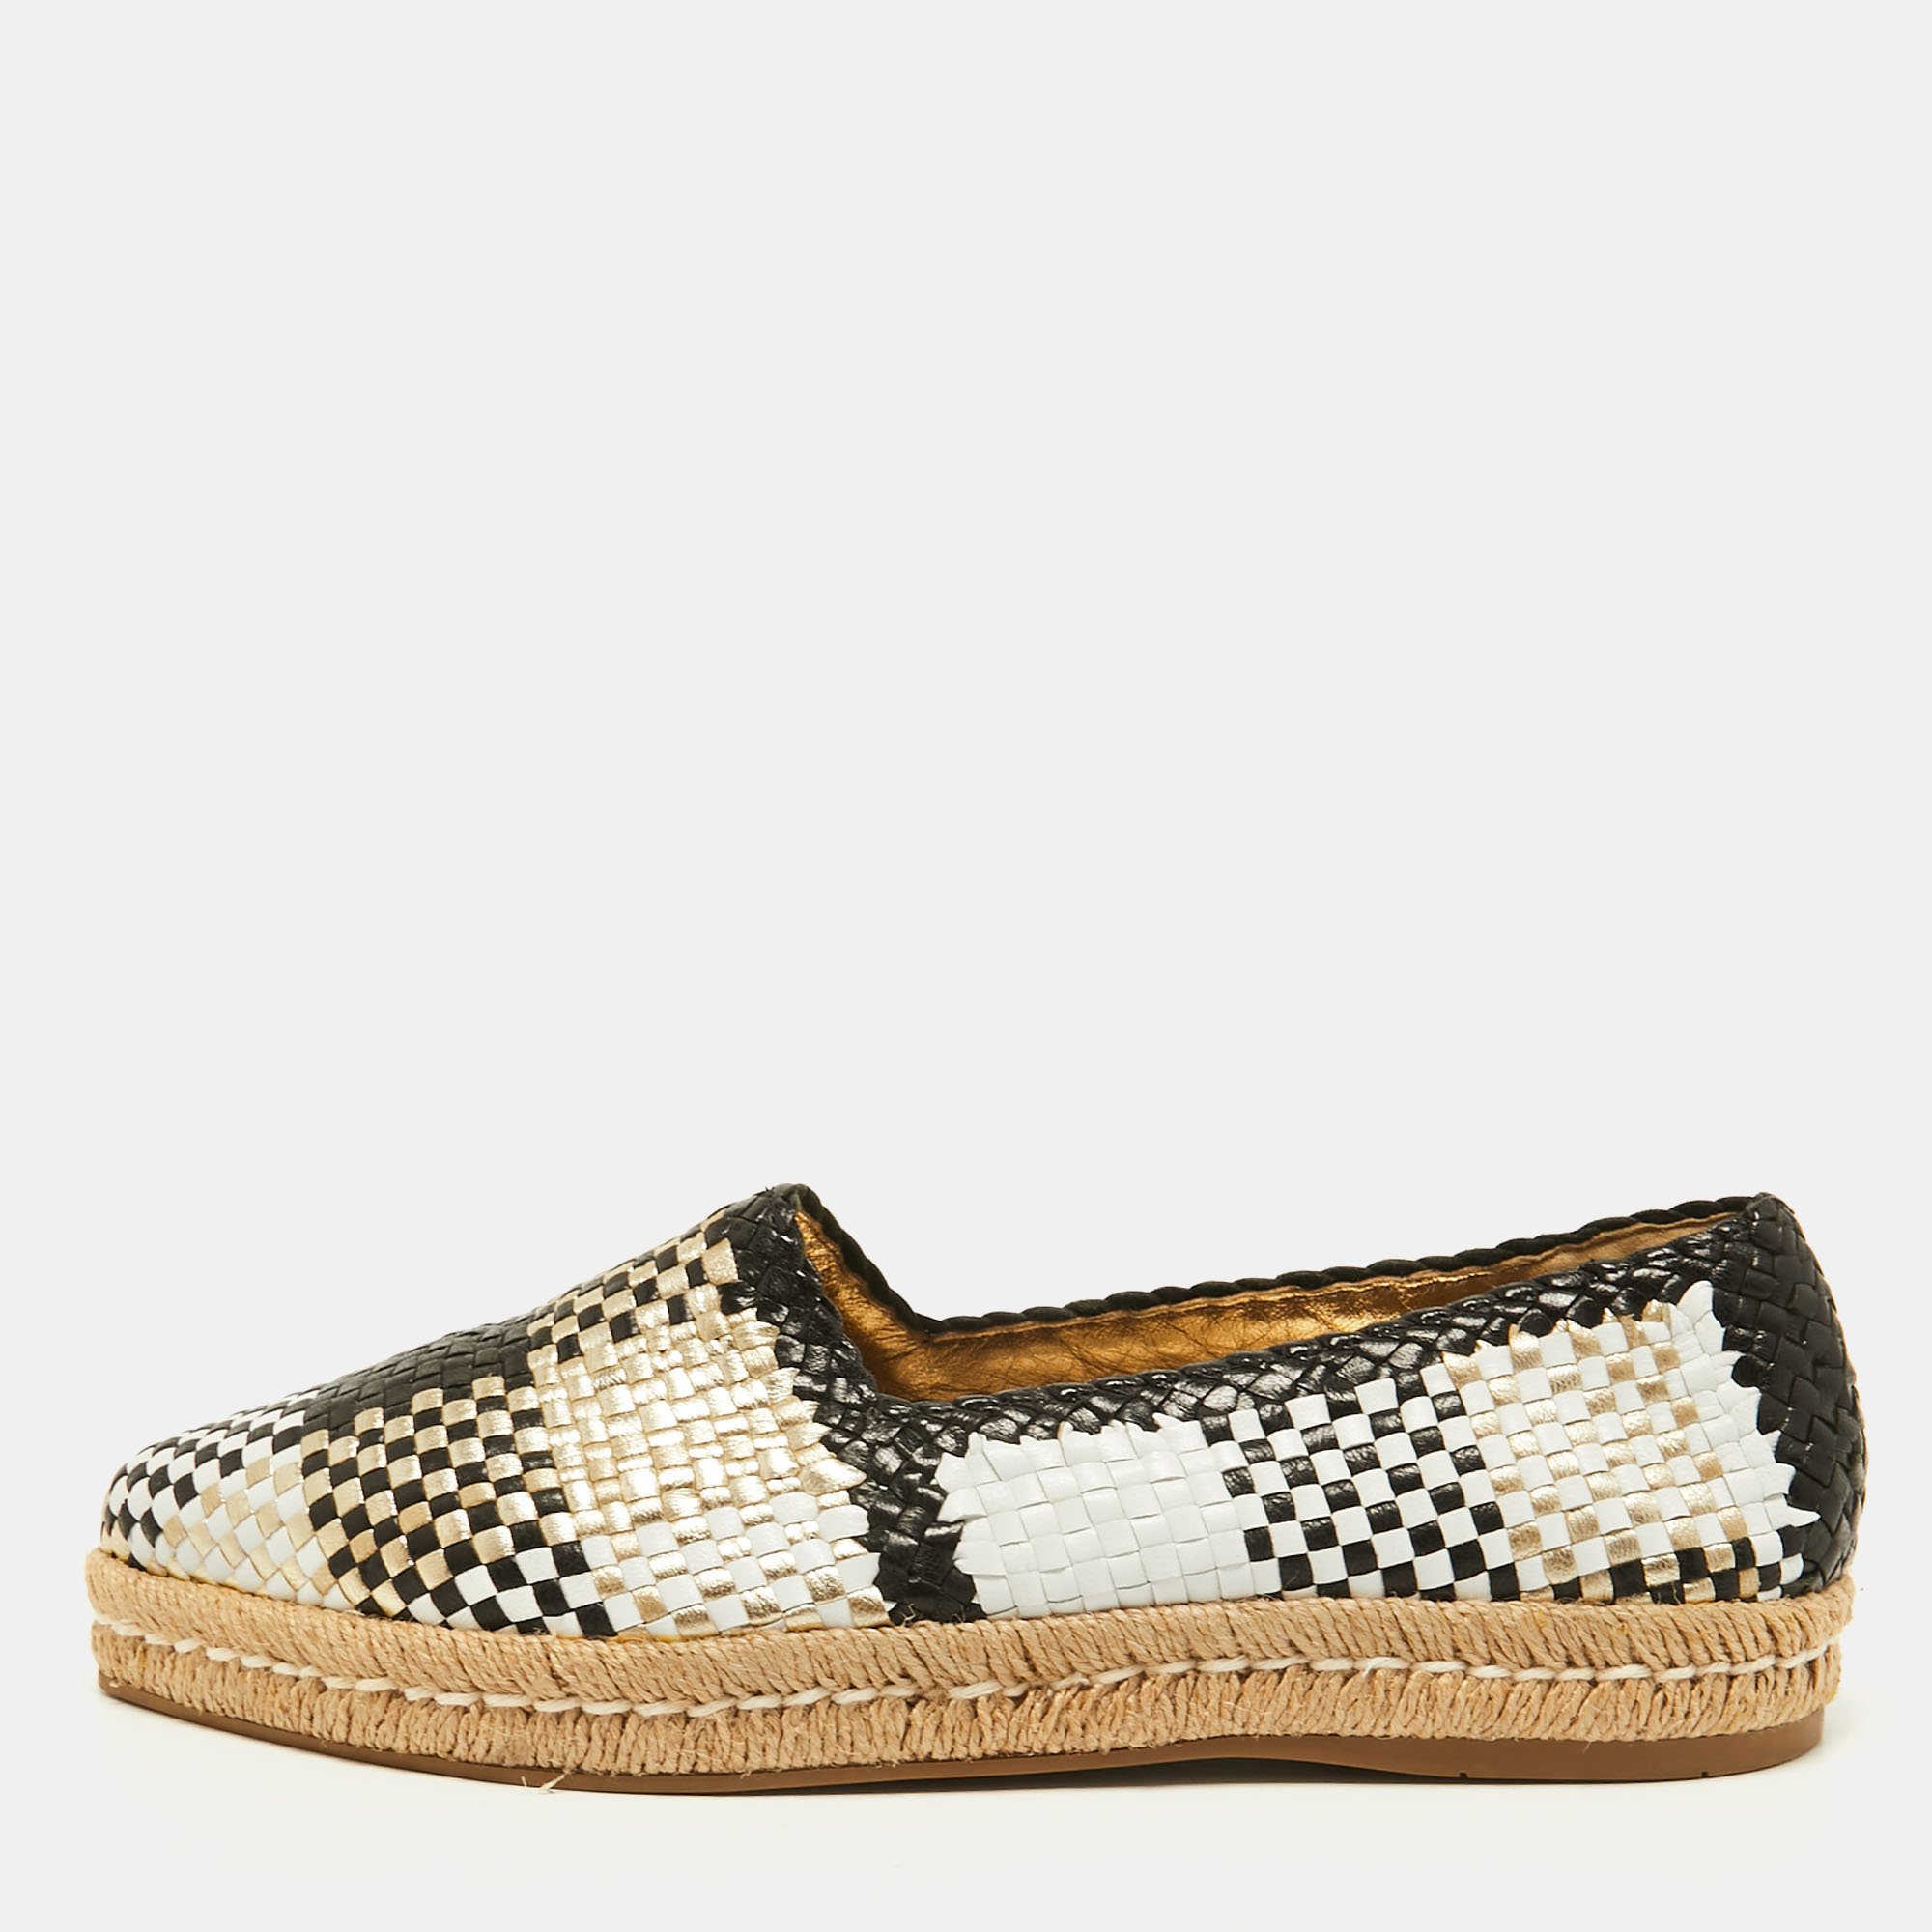 Pre-owned Prada Tricolor Woven Leather Espadrille Flats Size 37.5 In Black